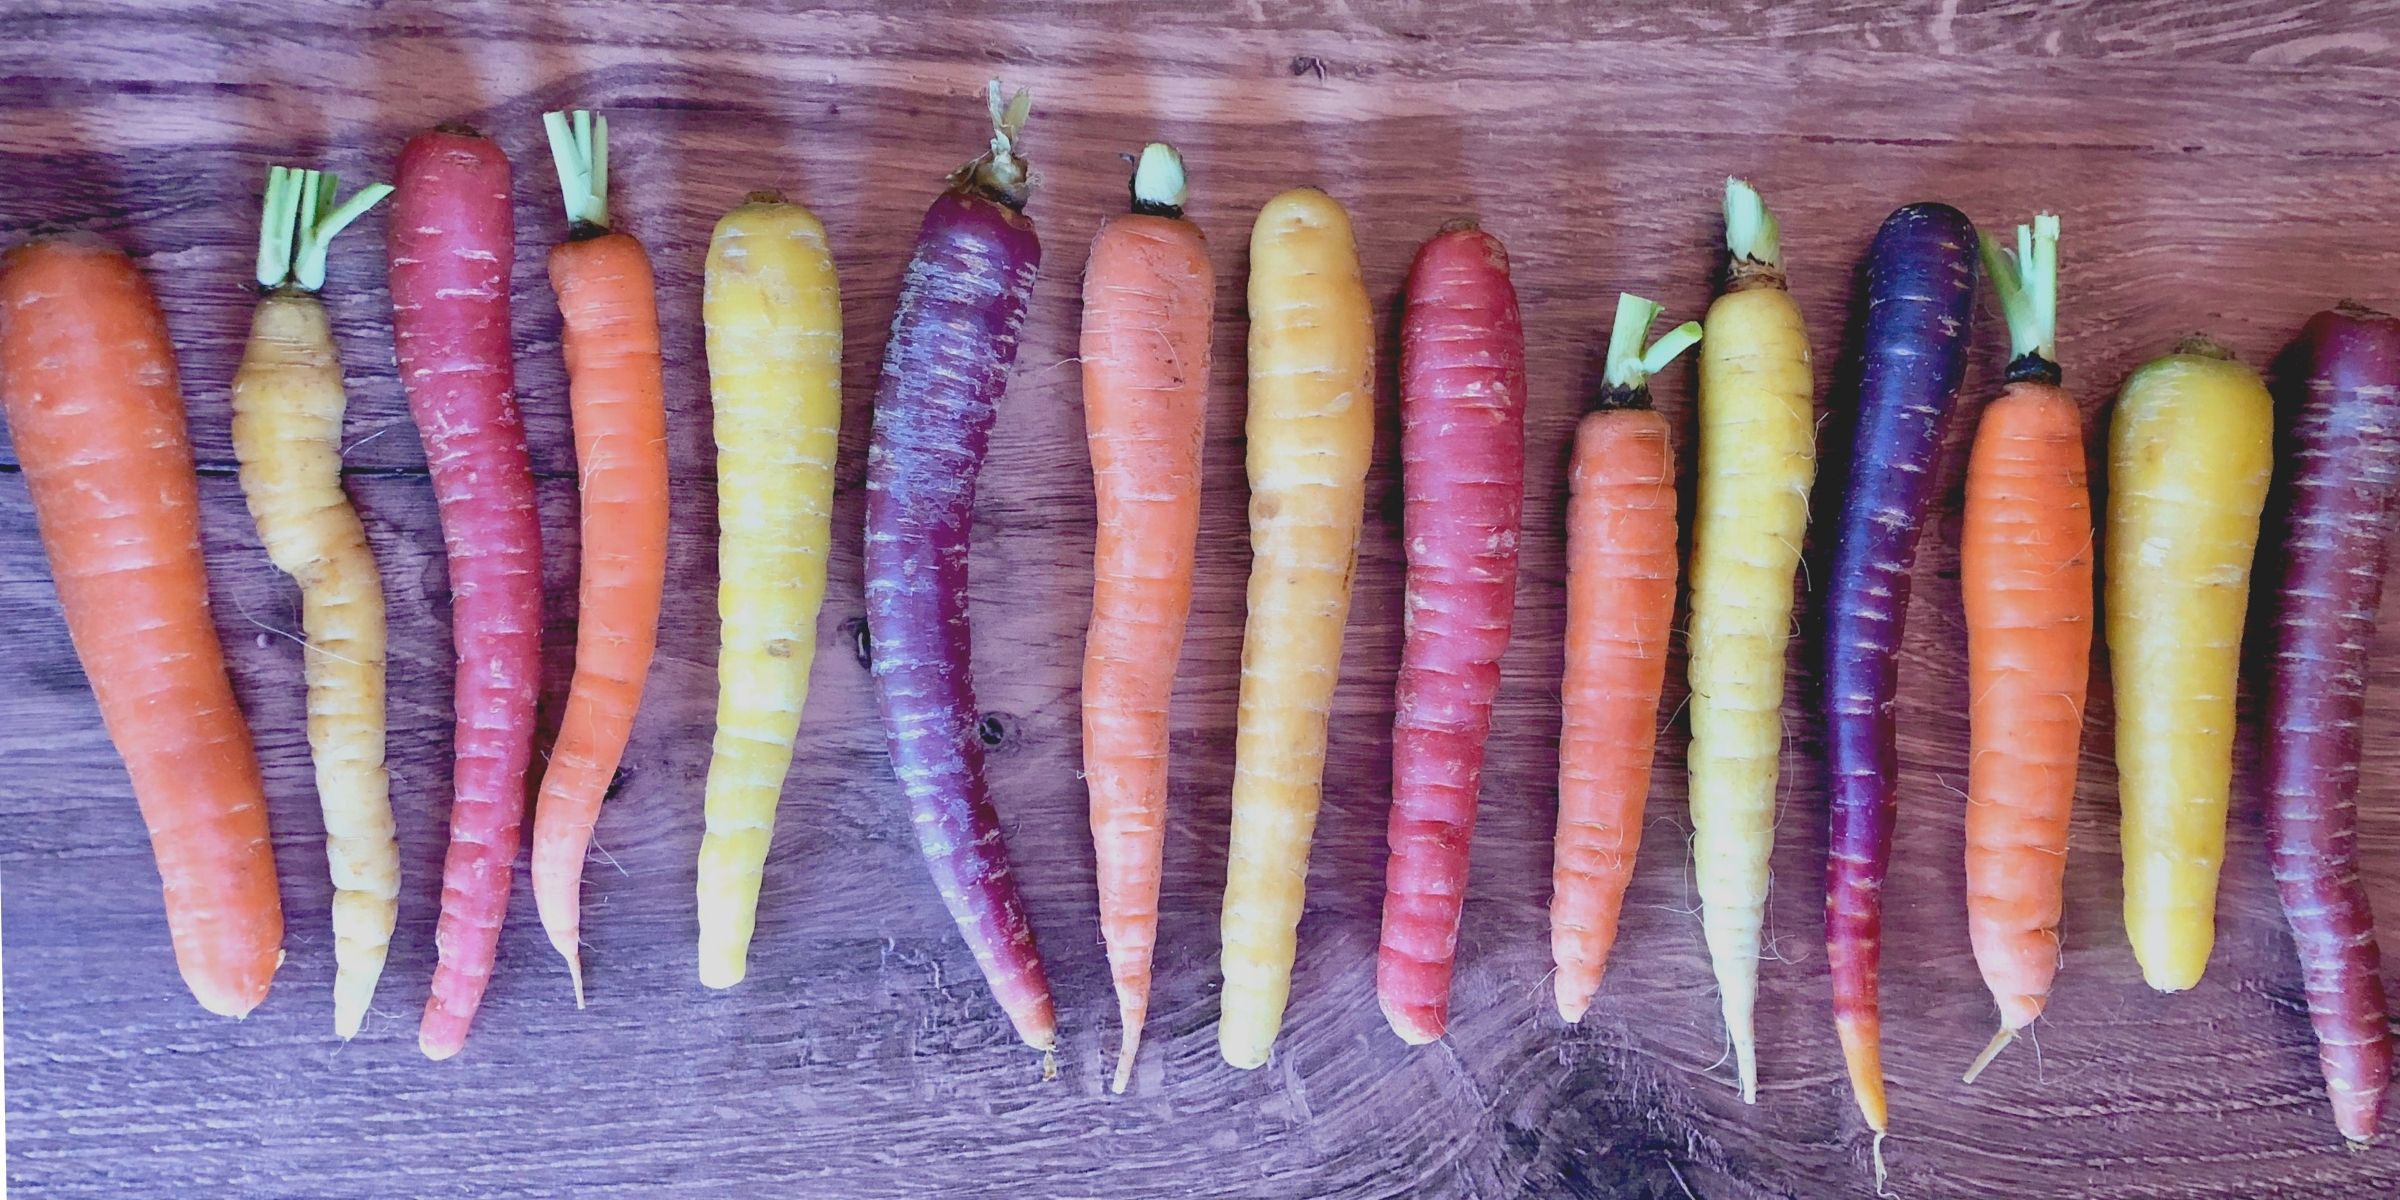 Fifteen orange, yellow, red, and purple raw carrots all lined up side by side